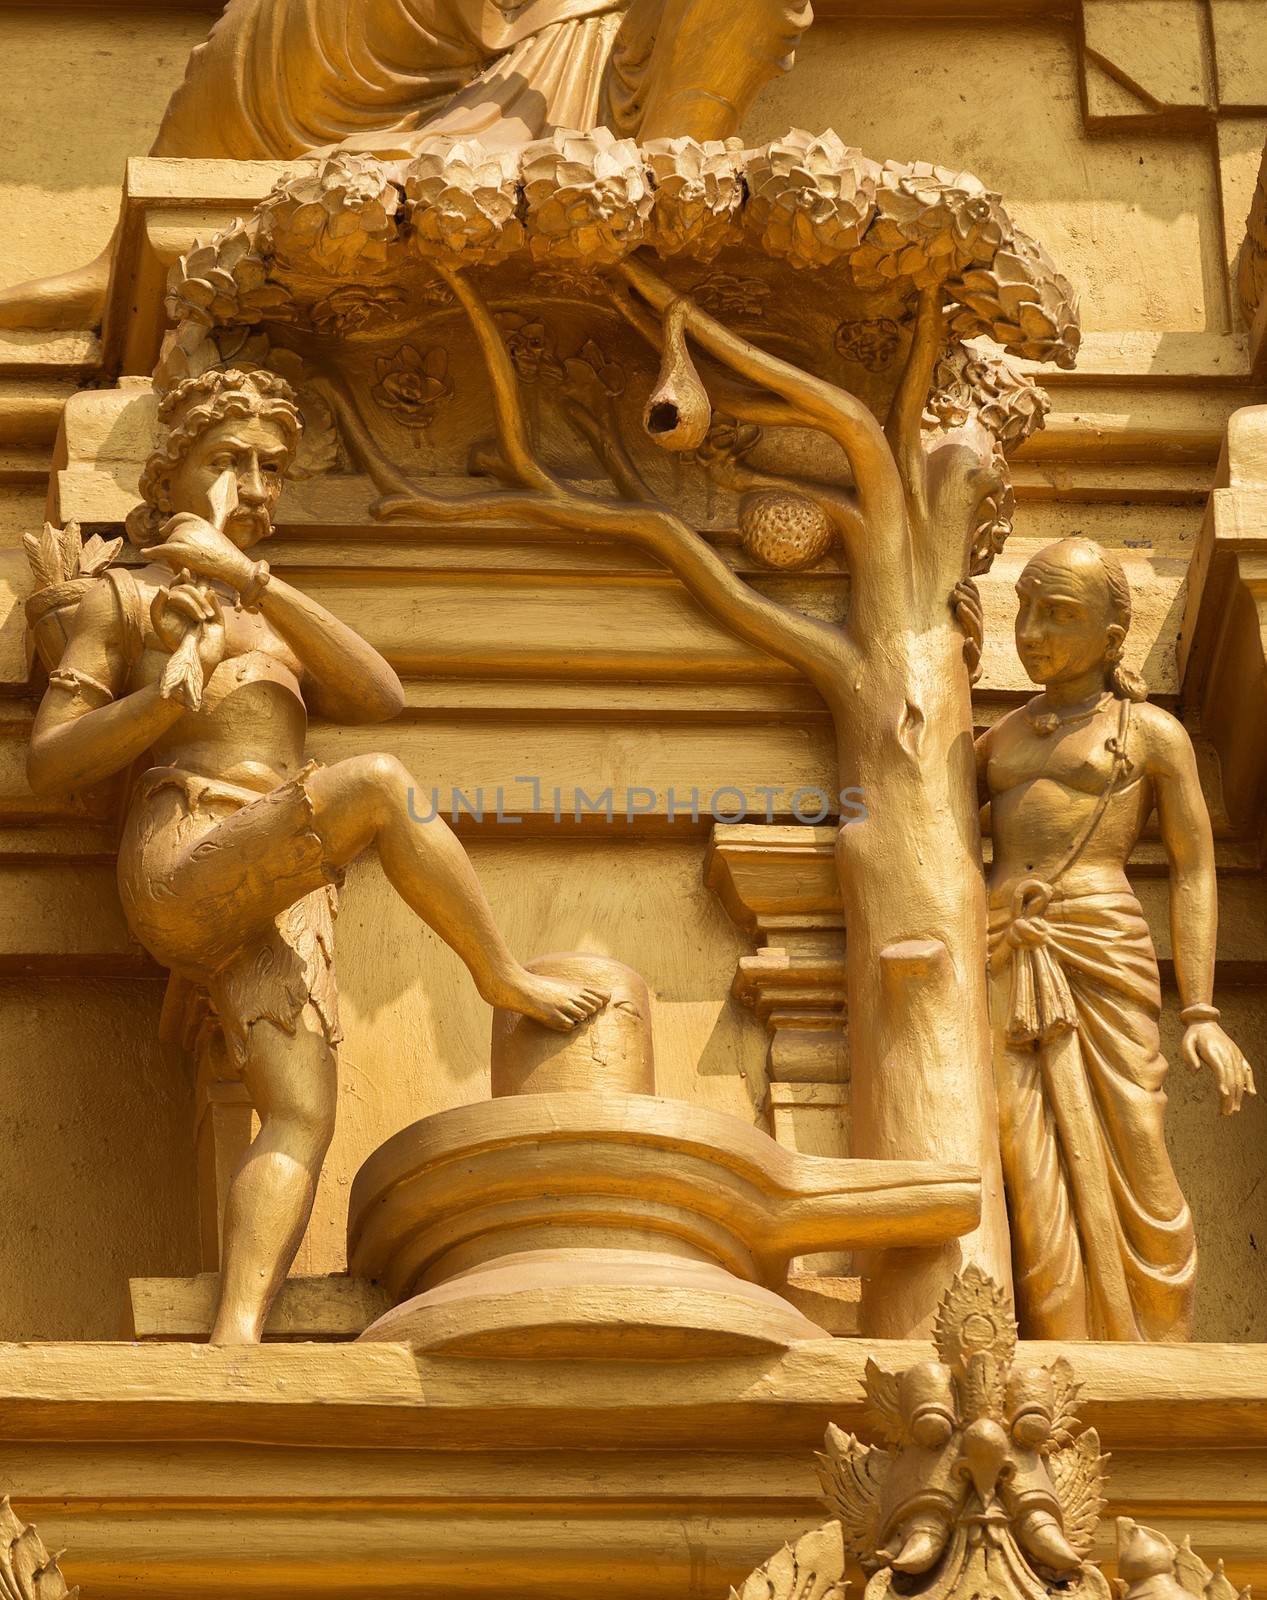 Statue on the golden temple tower of Sri Naheshwara in Bengaluru depicts Kannappa Nayanar, the hunter that donates his eyes to honor Lord Shiva.